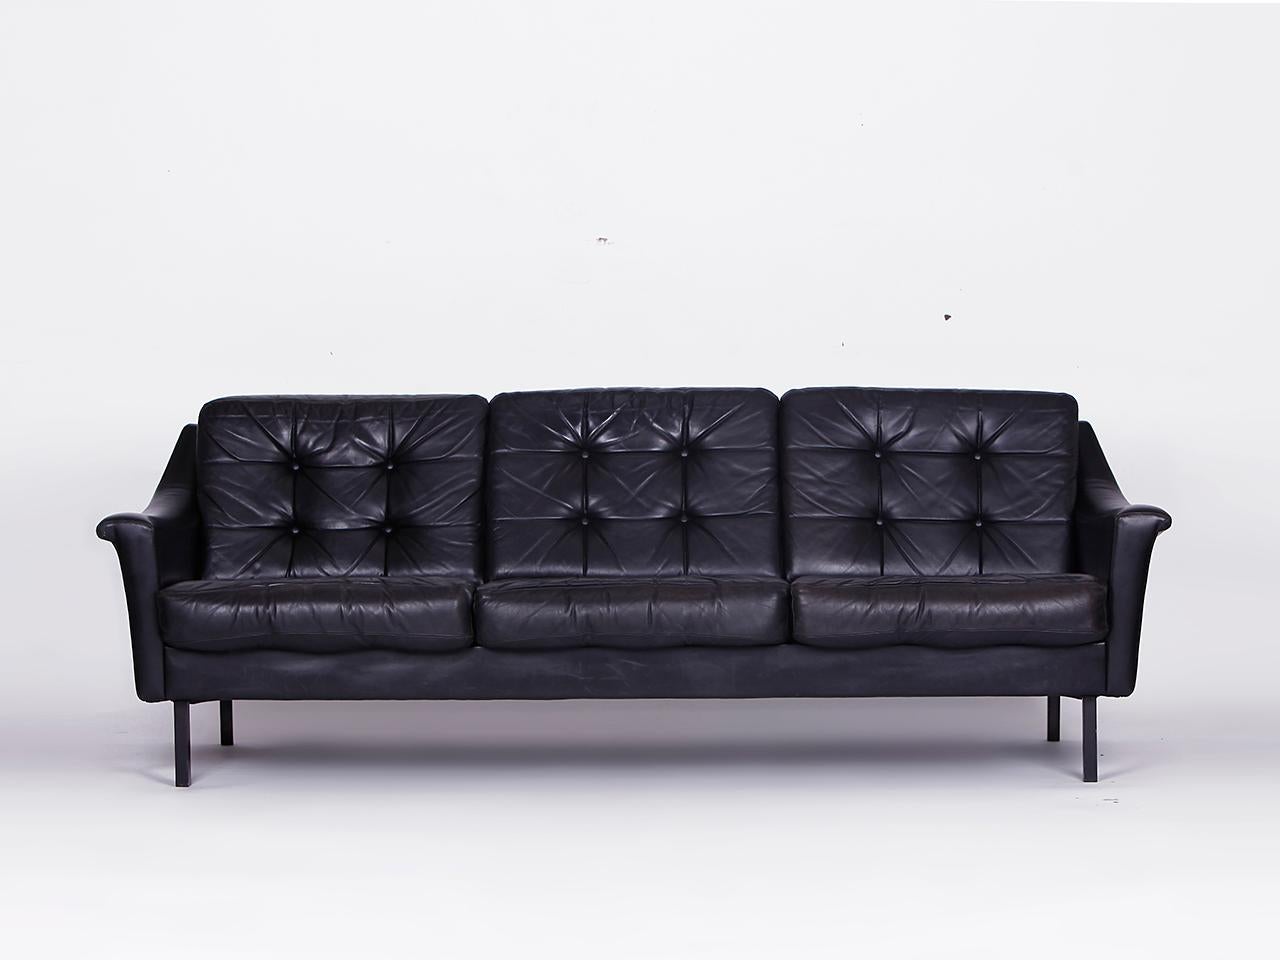 Black leather couch and 2 armchairs, Germany 1960s. 
This set of seats made of genuine leather is in a good condition with traces of use according to its age. 
Dimensions:
Armchair - H 71, W 85, D 83cm. 
Couch - H 71, W 200, D 83cm.